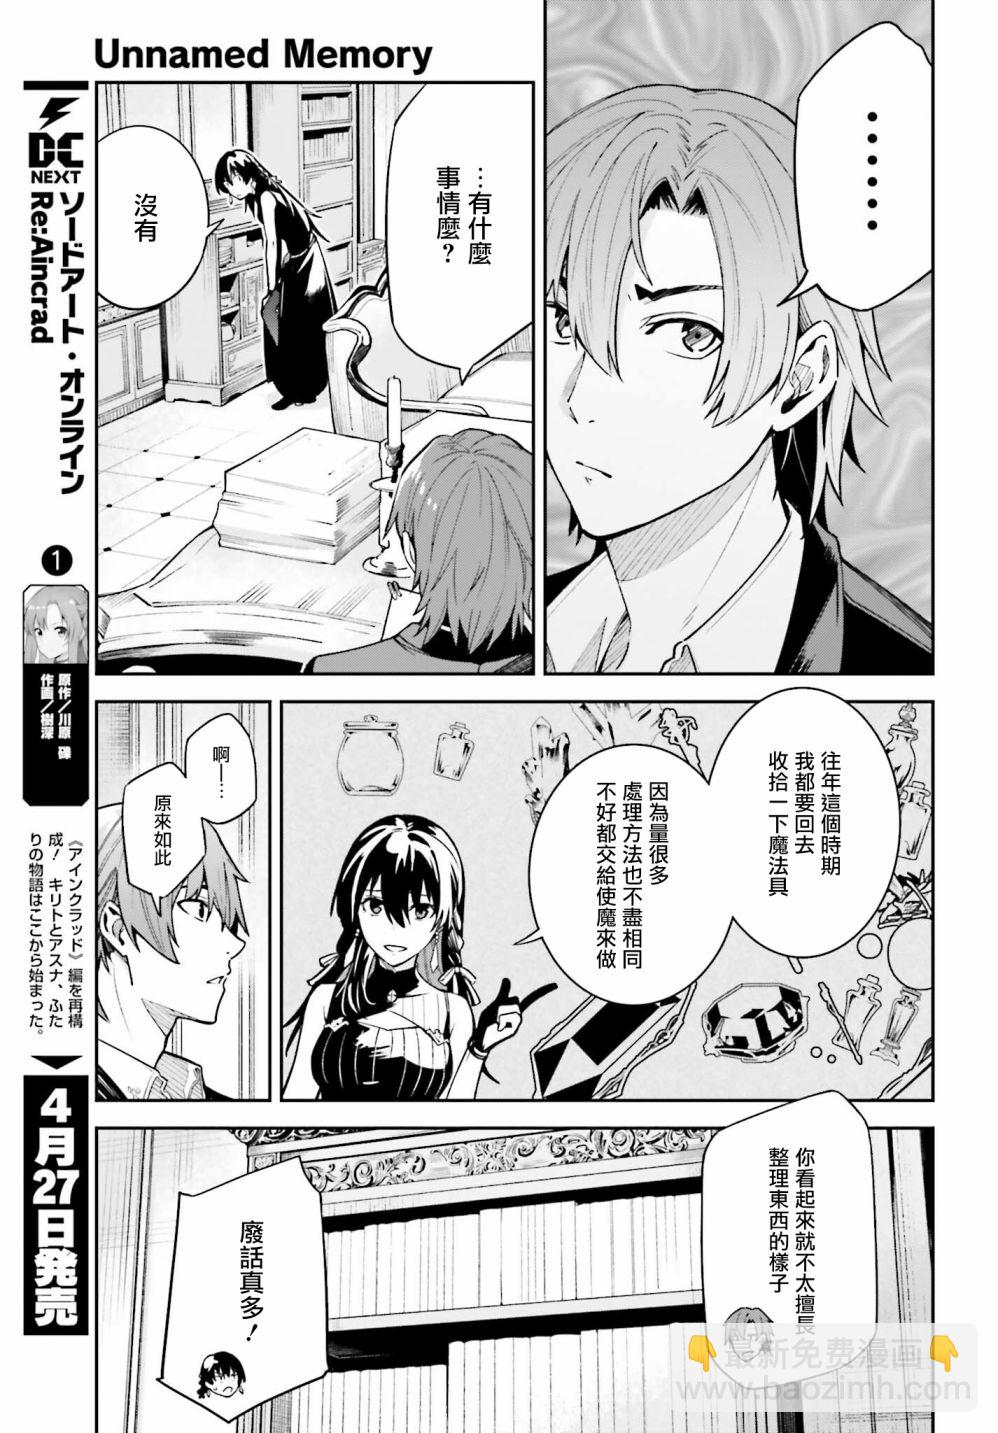 Unnamed Memory - 第16.5话 - 1